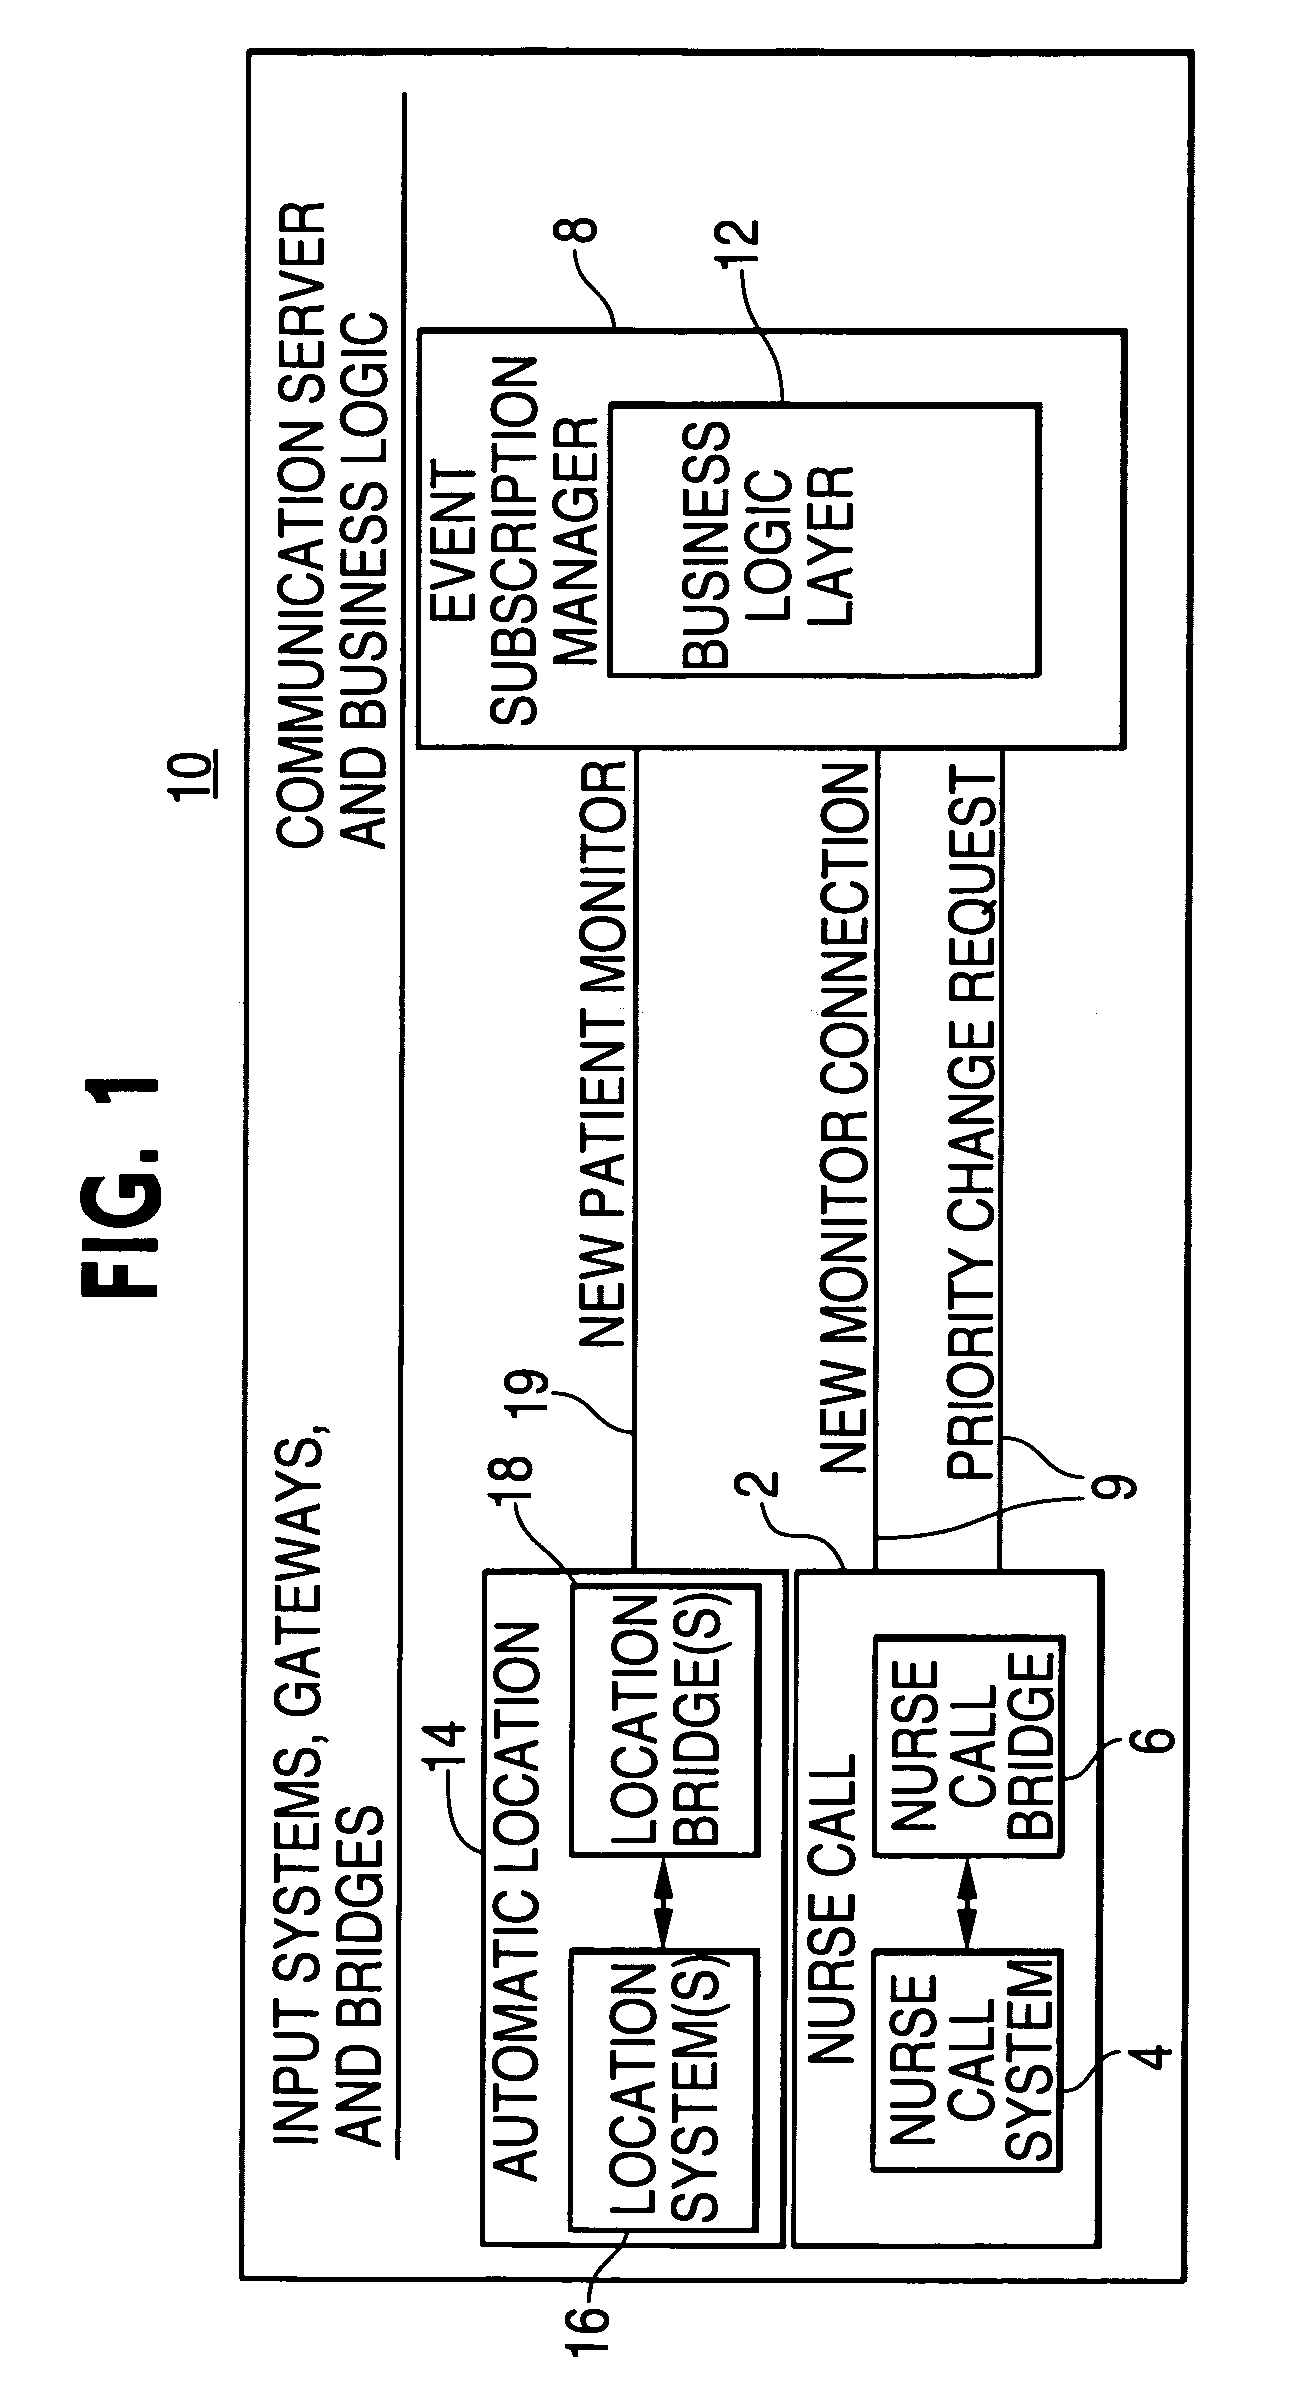 Automatically tracking mobilized equipment and nurse call priority assignment system and method